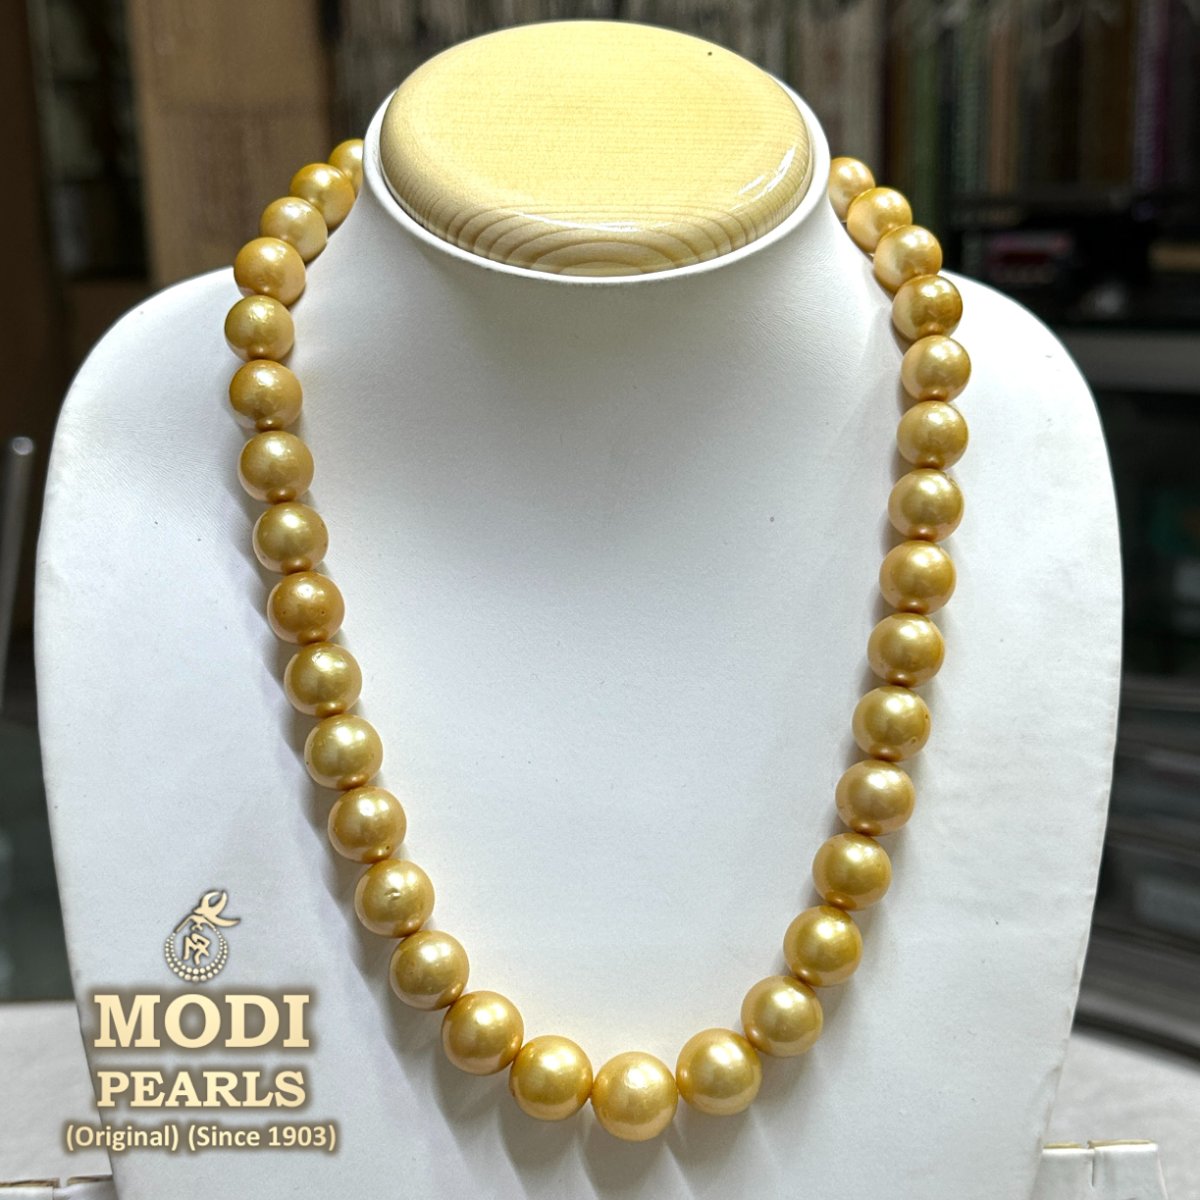 Golden South Sea Pearl Pendant Necklace in 18K Yellow Gold | Qlassico